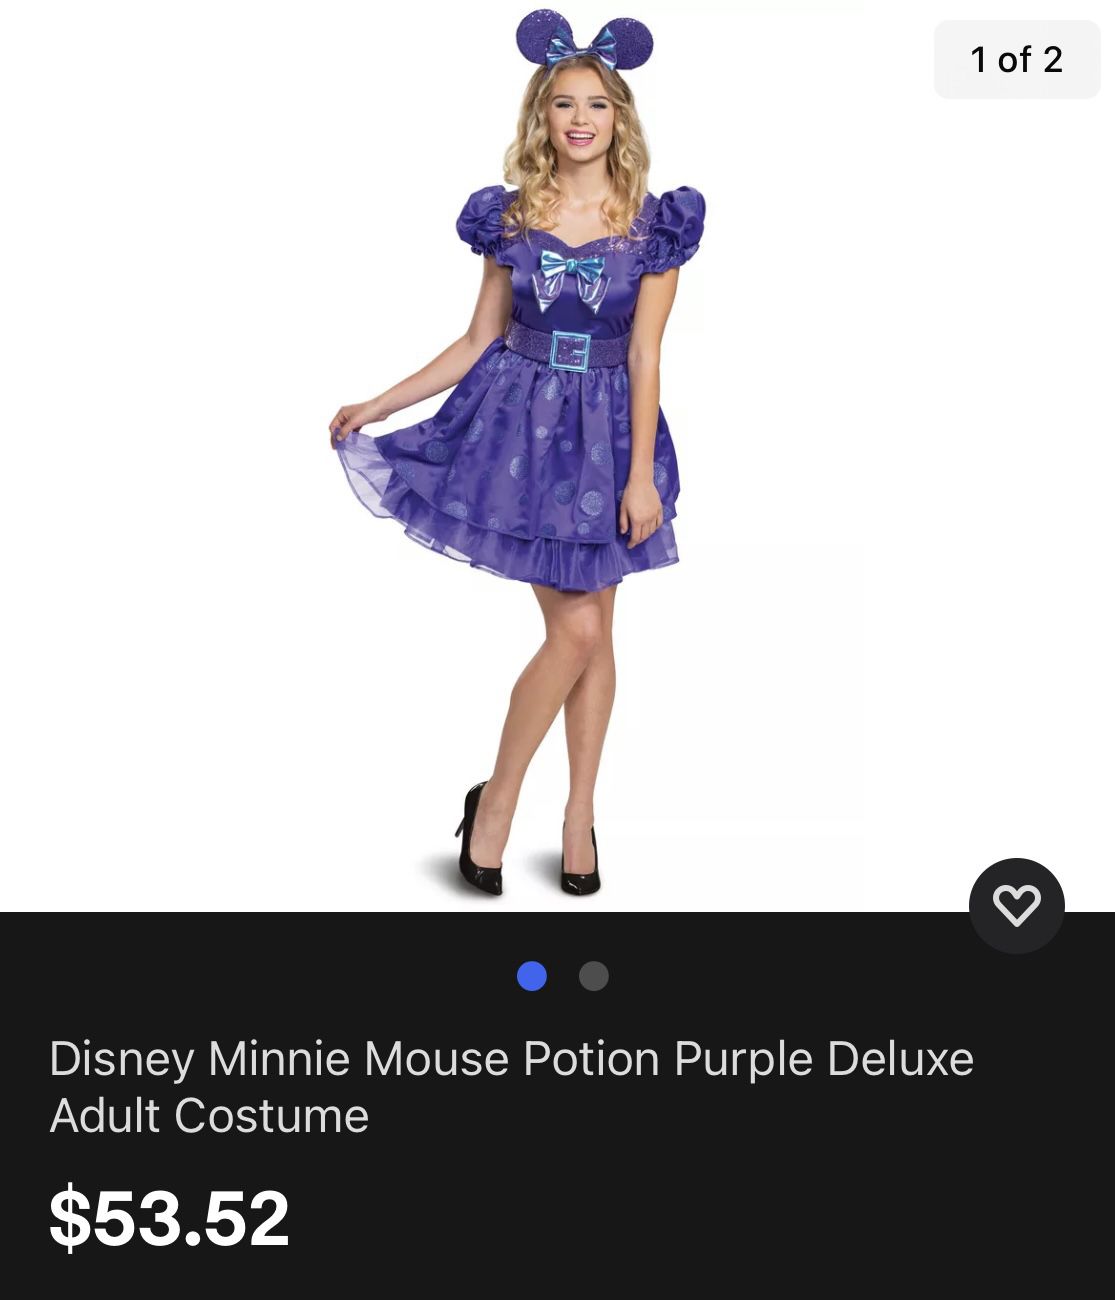 Disney Potion Purple Deluxe Dress and Ears Large